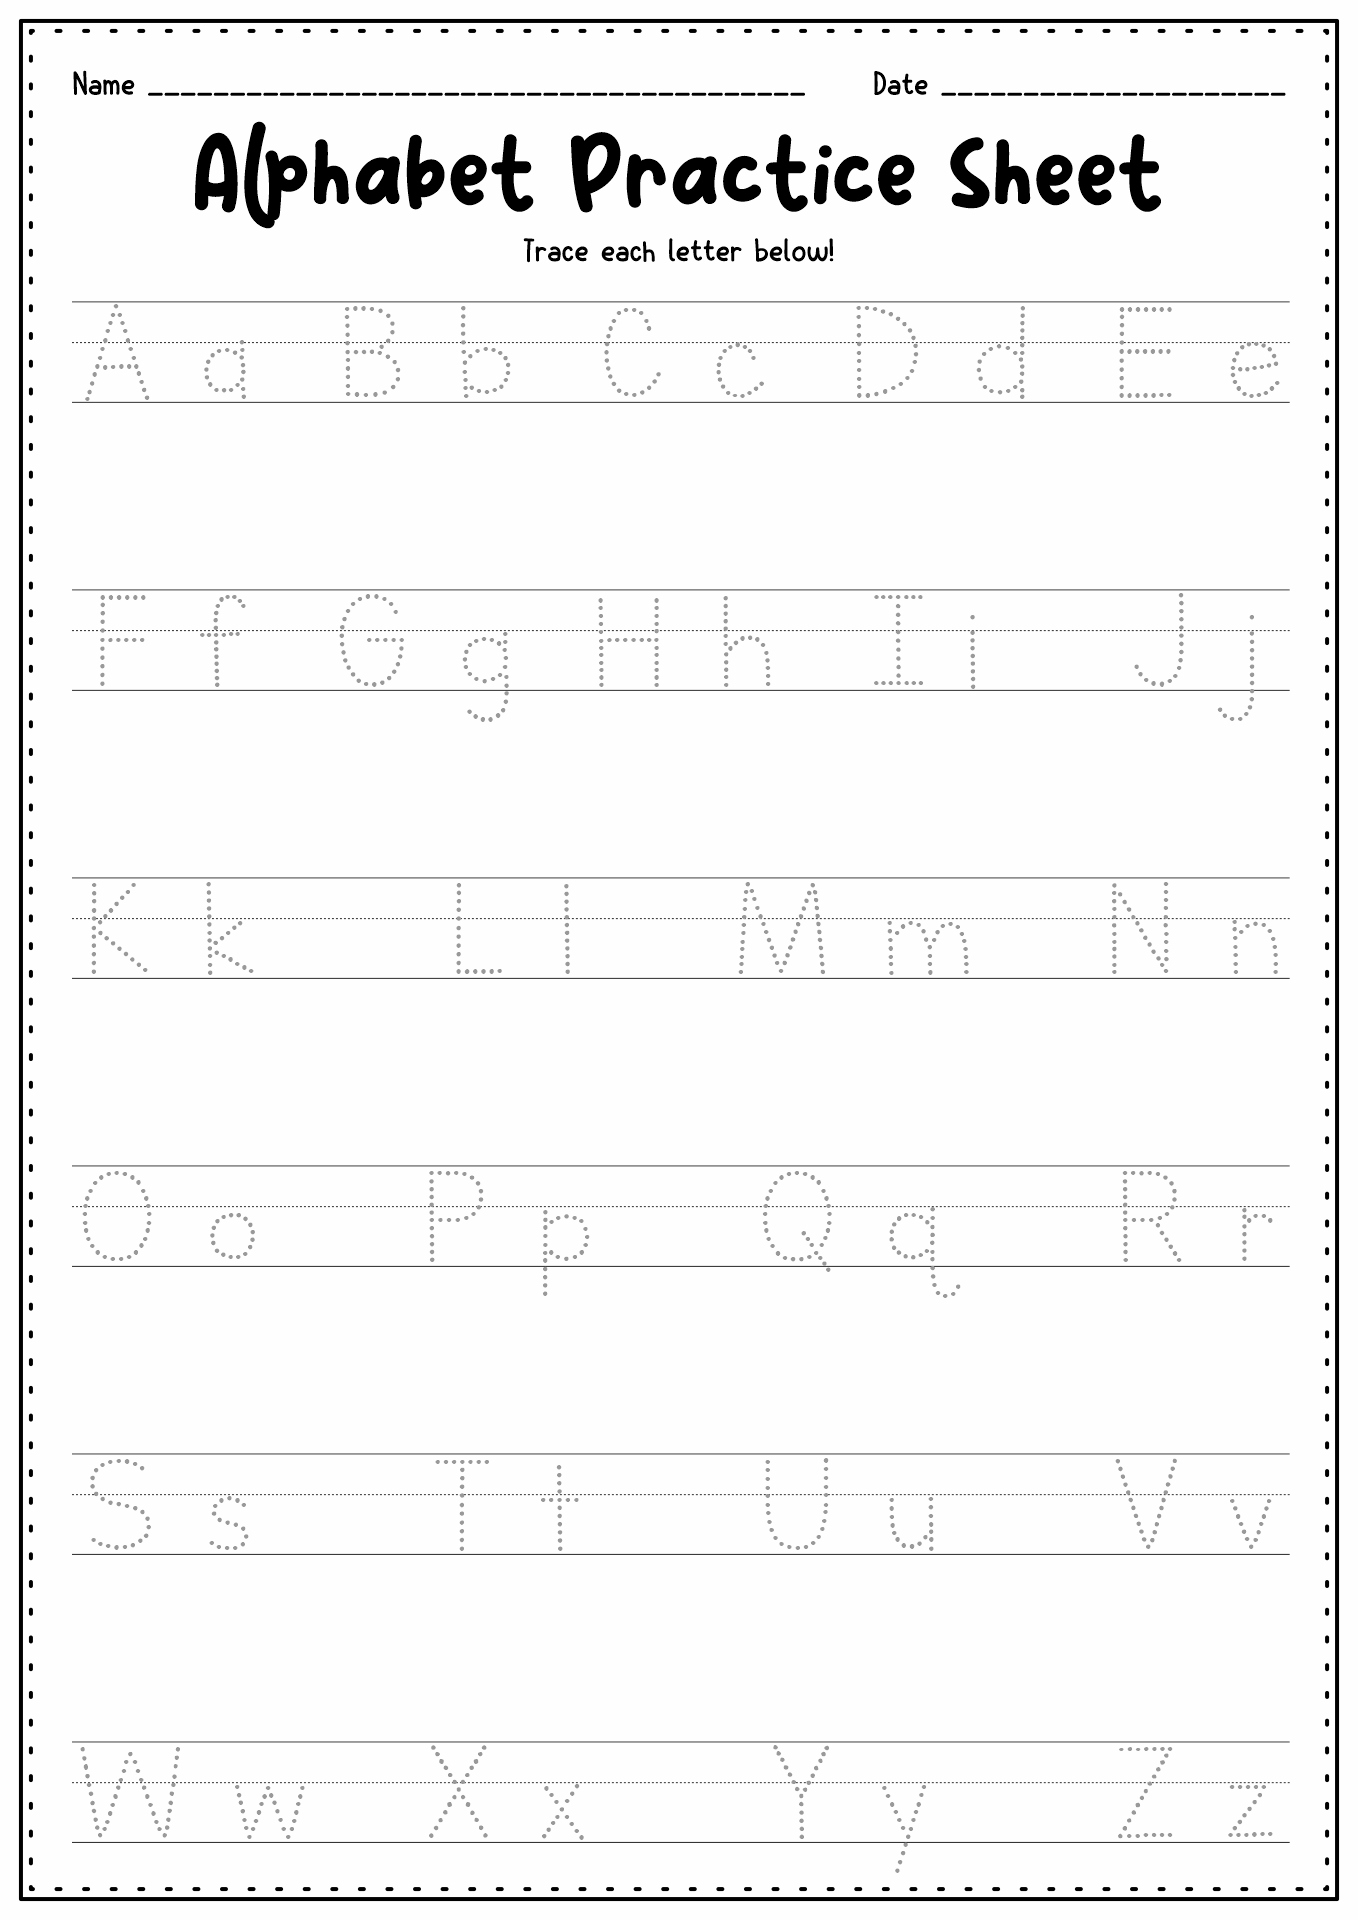 16 Best Images of Alphabet Homework Worksheets - Learning to Write ...